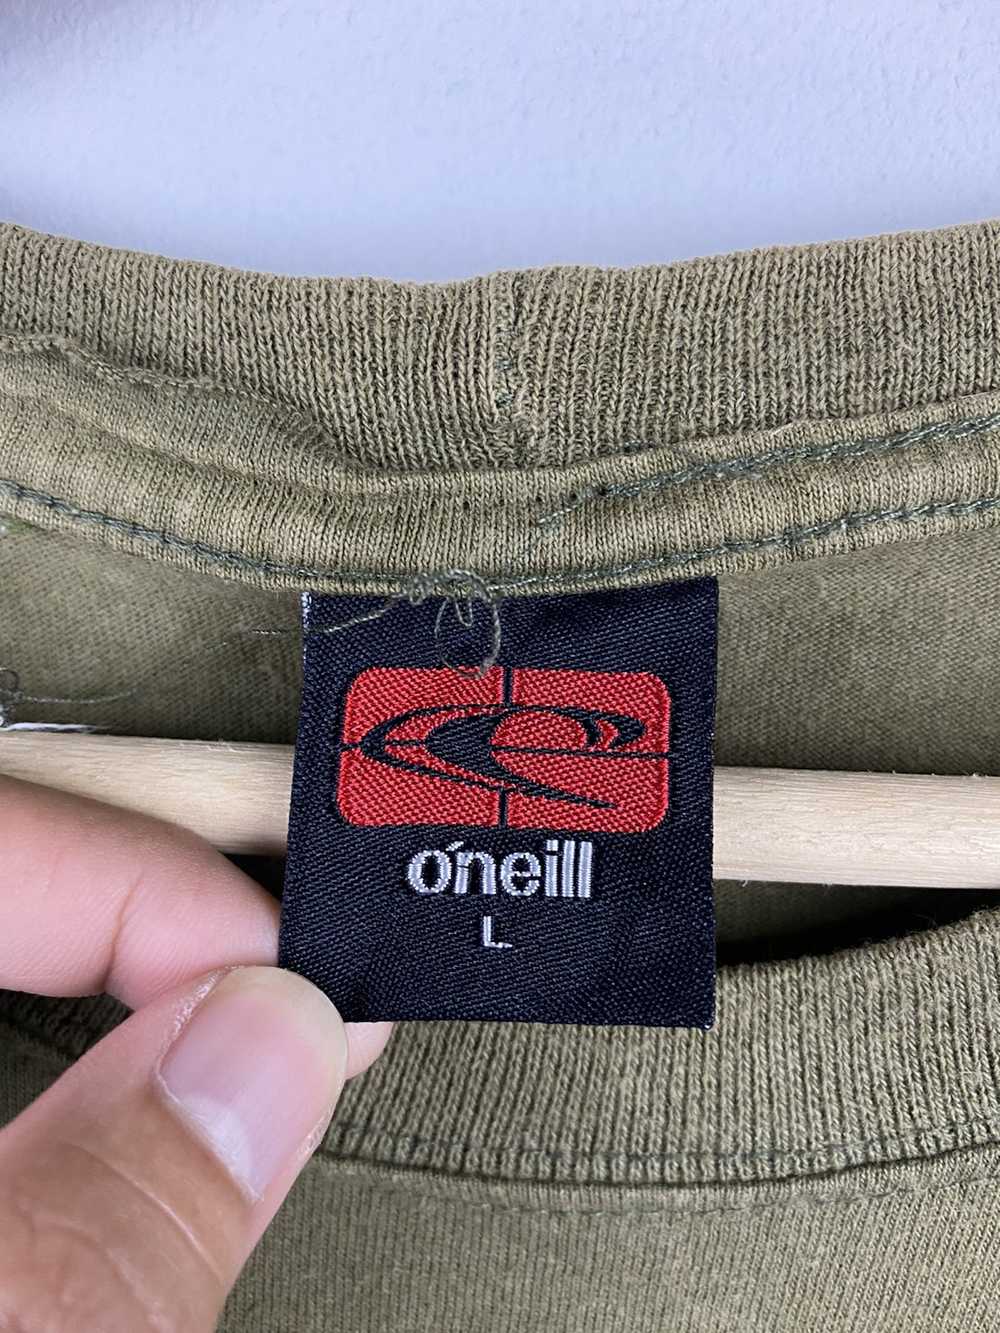 Oneill × Surf Style × Vintage Vintage Oneill Surf - image 8